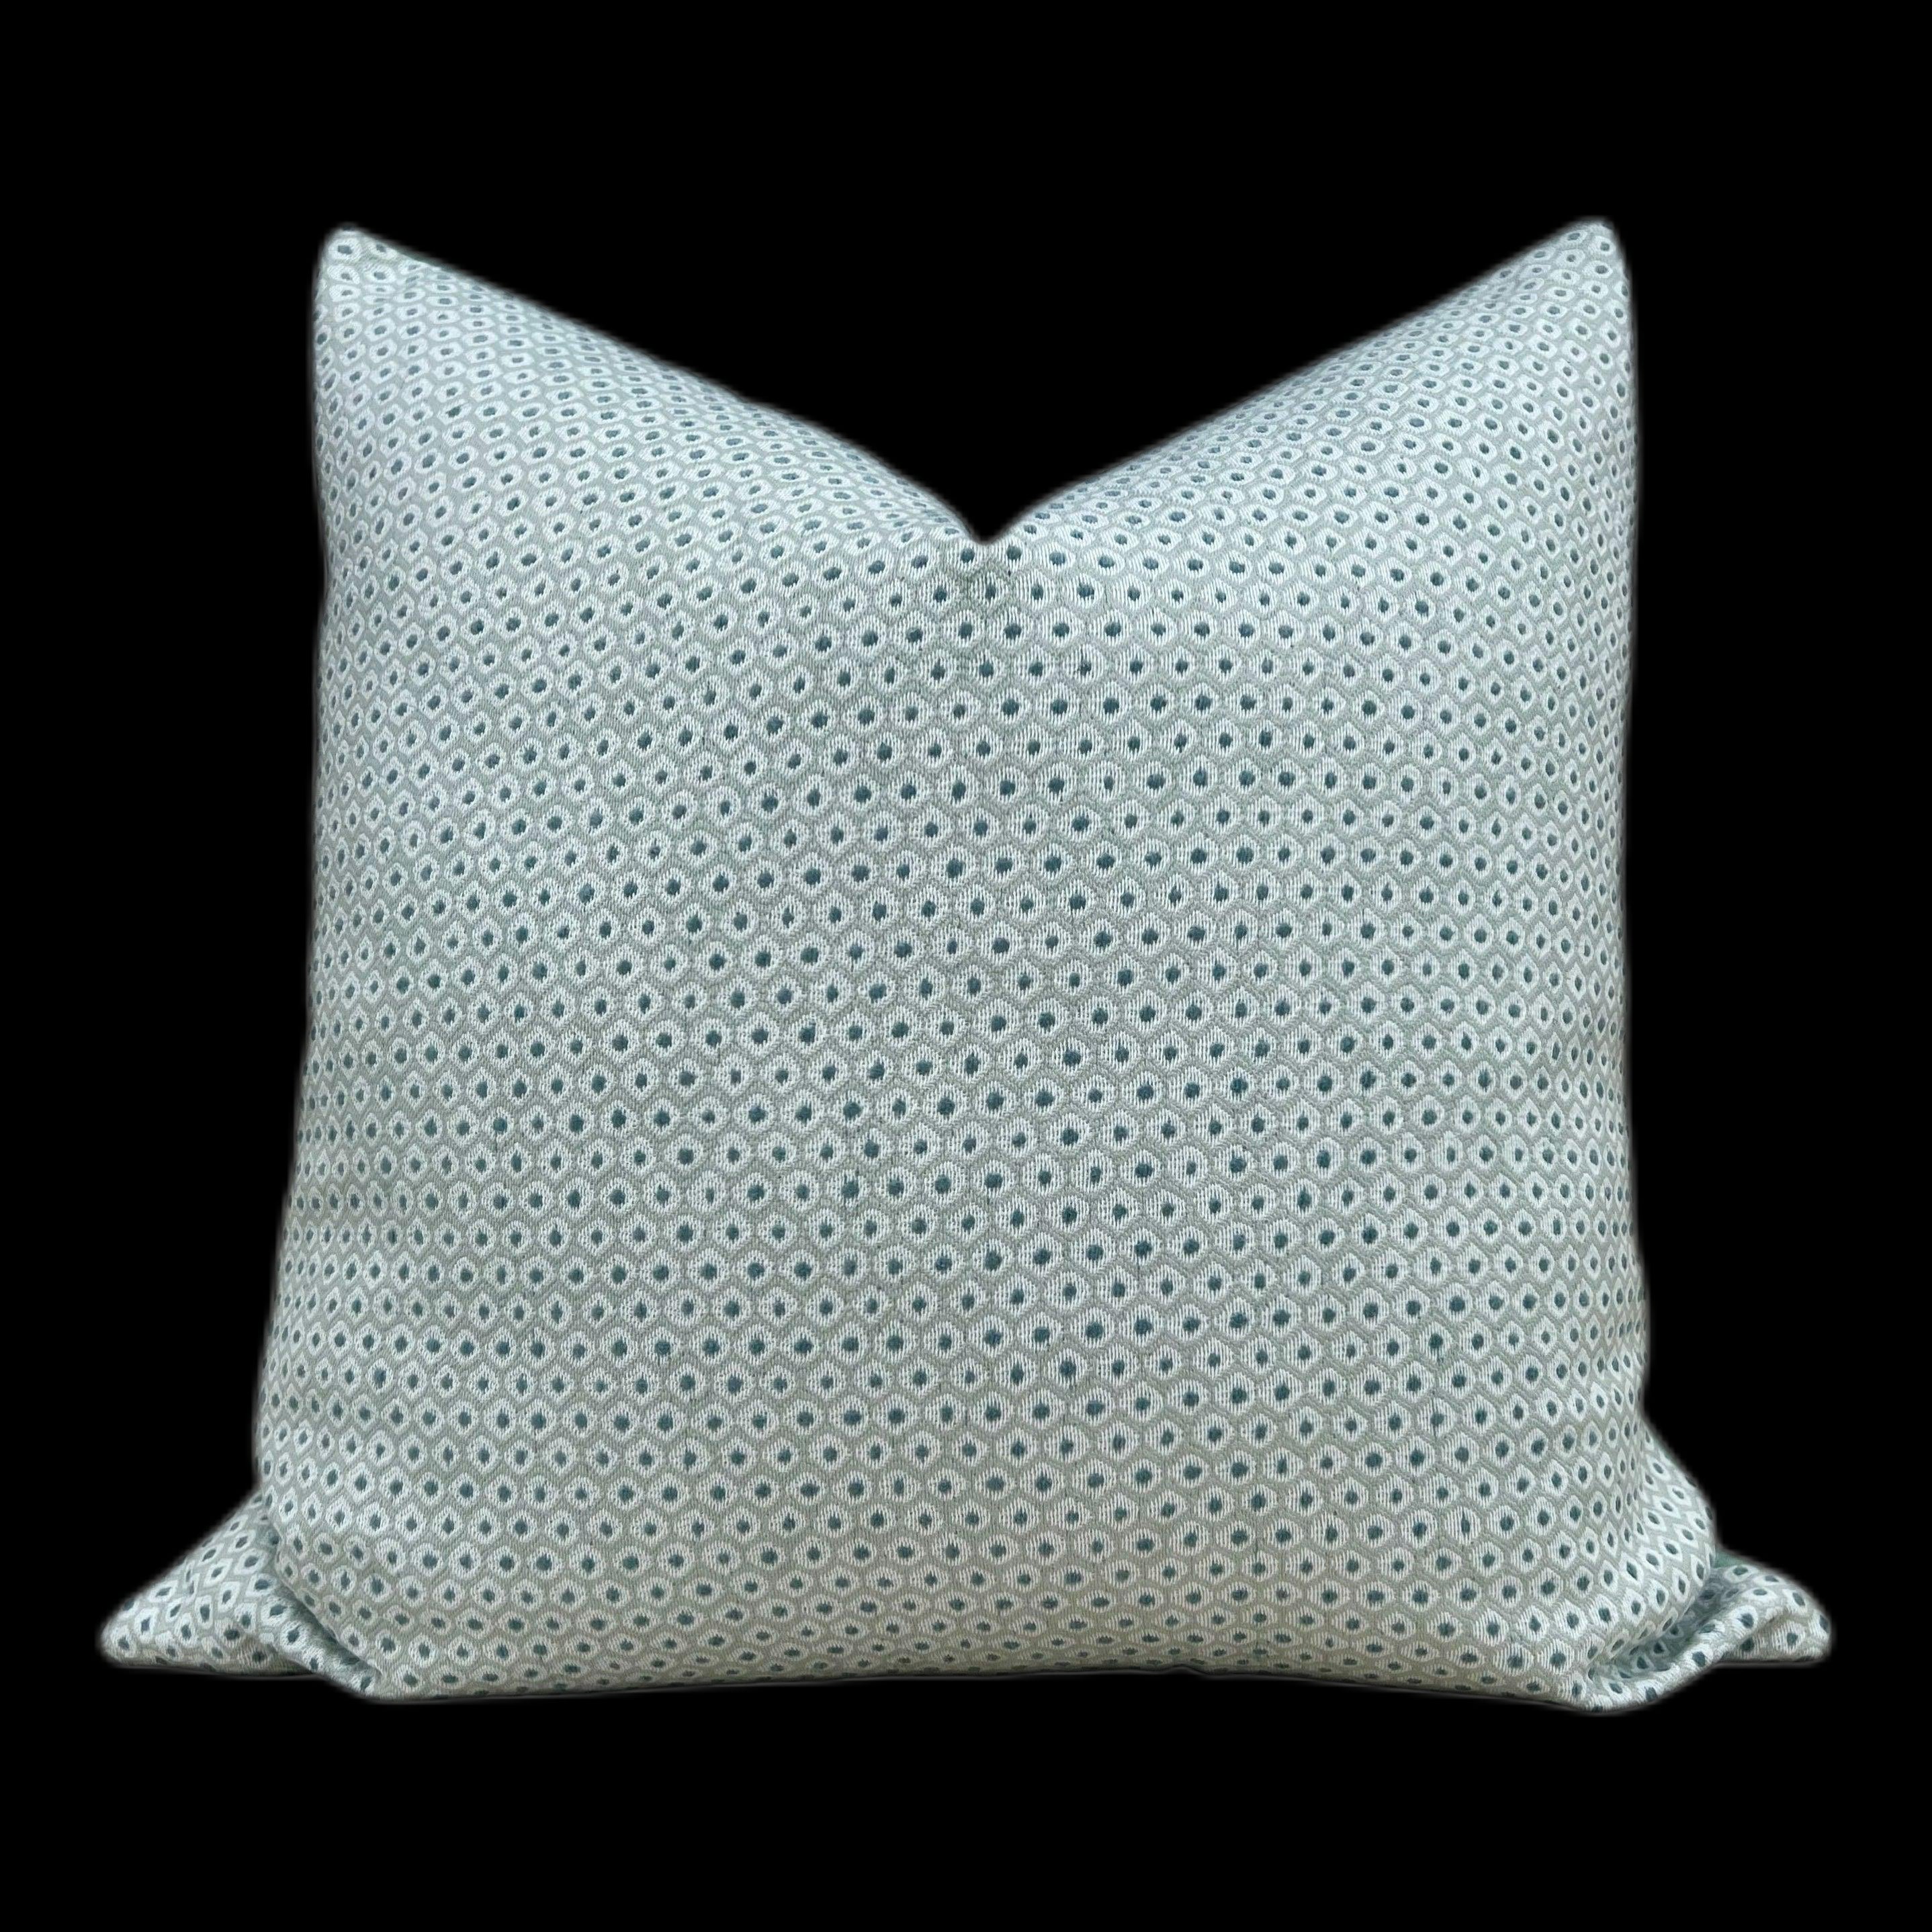 Outdoor Woven Pixie Pillow in Mist and Aqua. Outdoor Pillow Cover, Sunbrella Pillow, Lumbar Outdoor Pillow, Blue Outdoor Cushion Cover